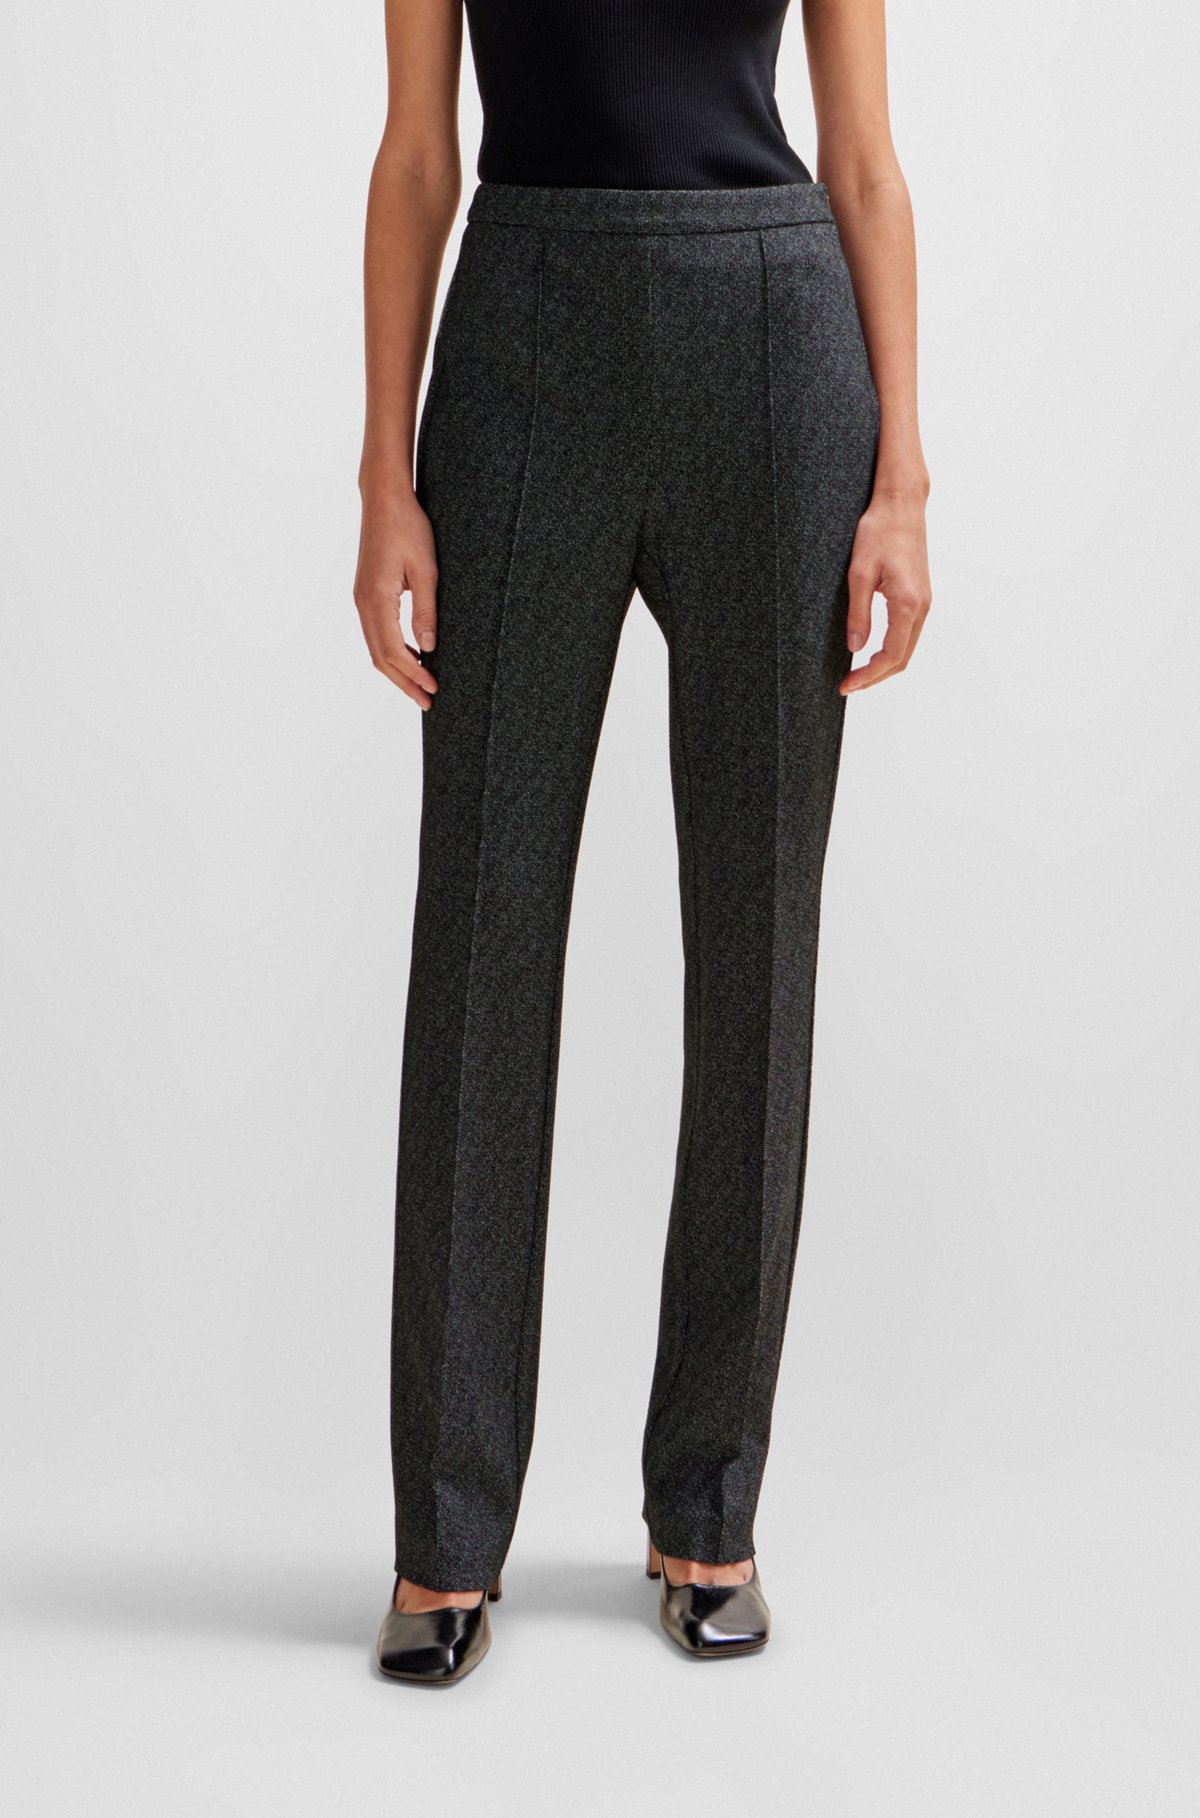 BOSS - Slim-fit high-rise trousers in stretch jersey